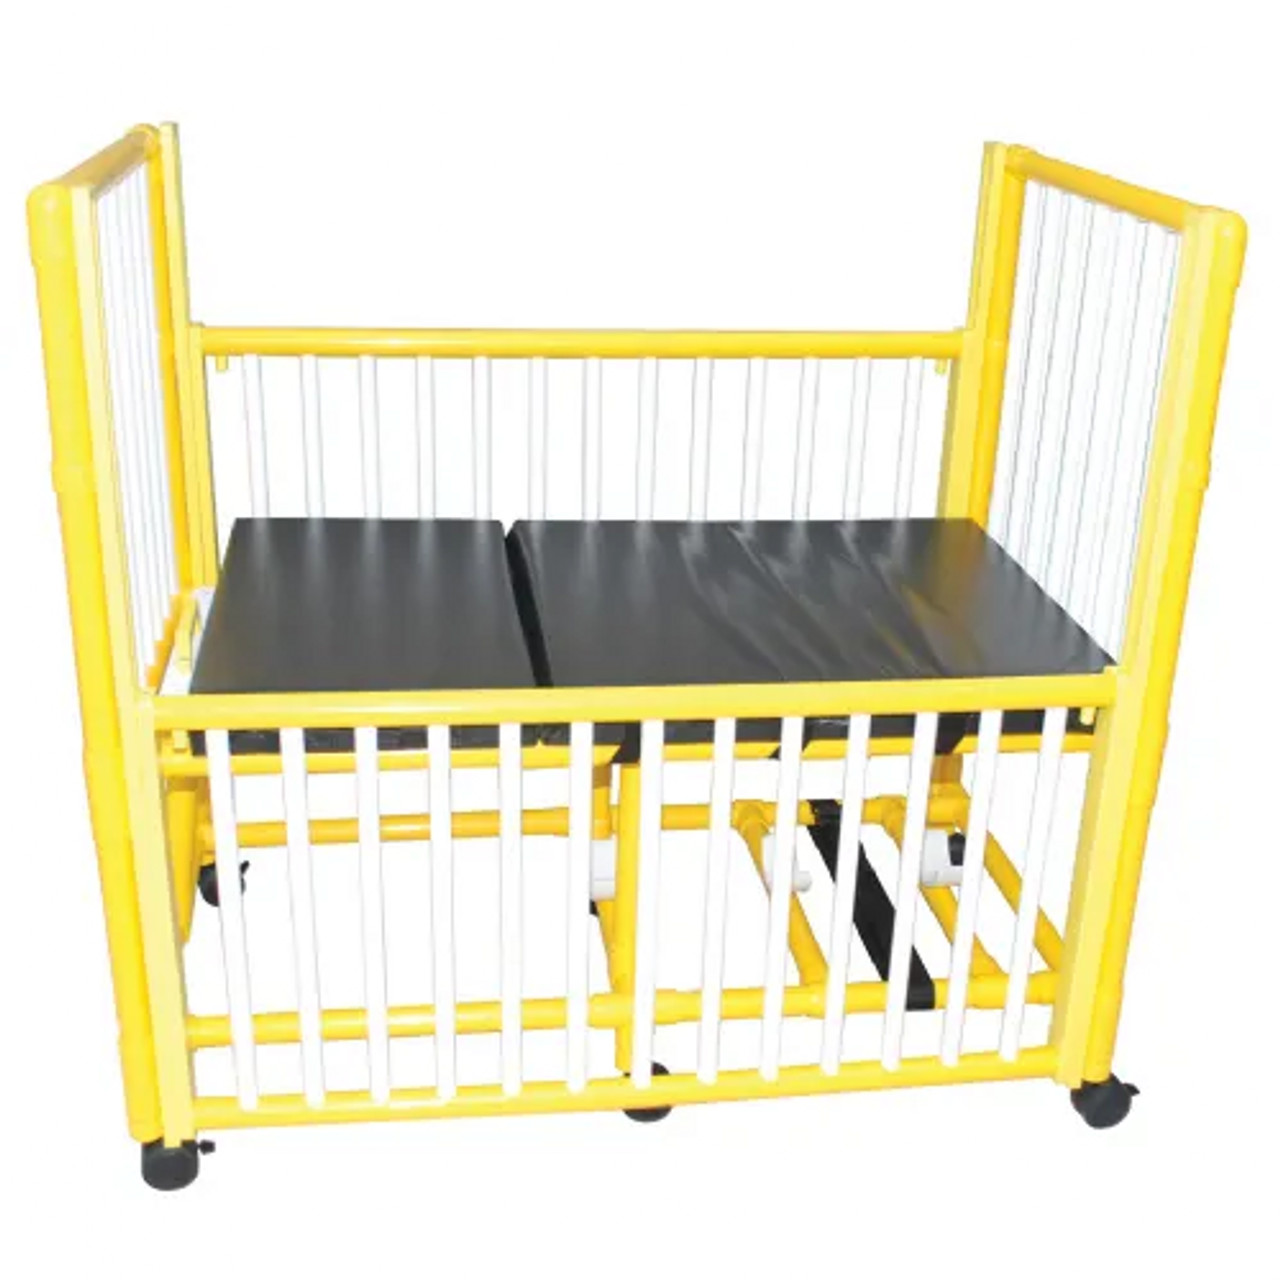 Pedi-Crib Infant Hospital Crib Bed | Safe, Comfortable, and Adjustable-Chicken Pieces